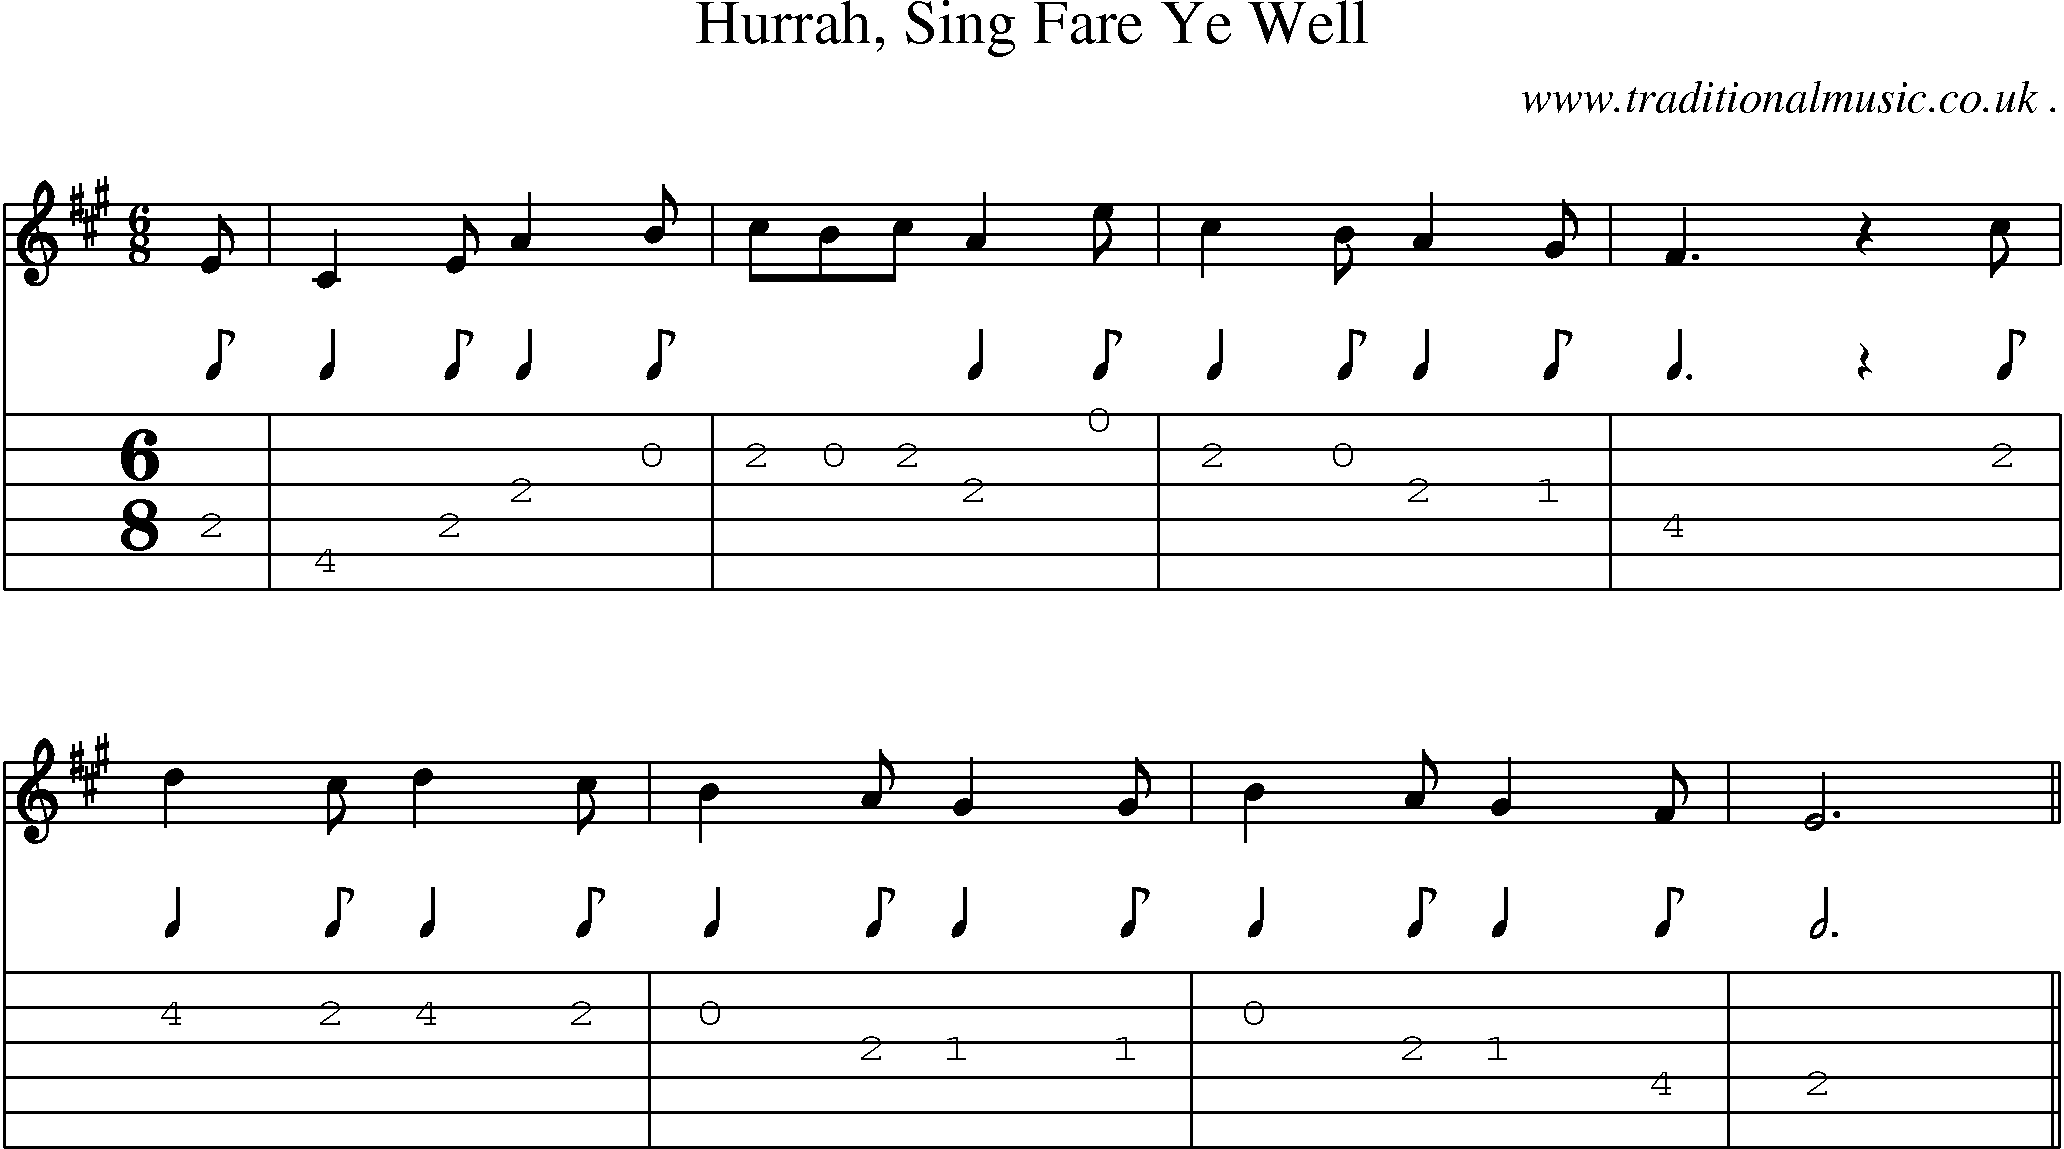 Sheet-Music and Guitar Tabs for Hurrah Sing Fare Ye Well